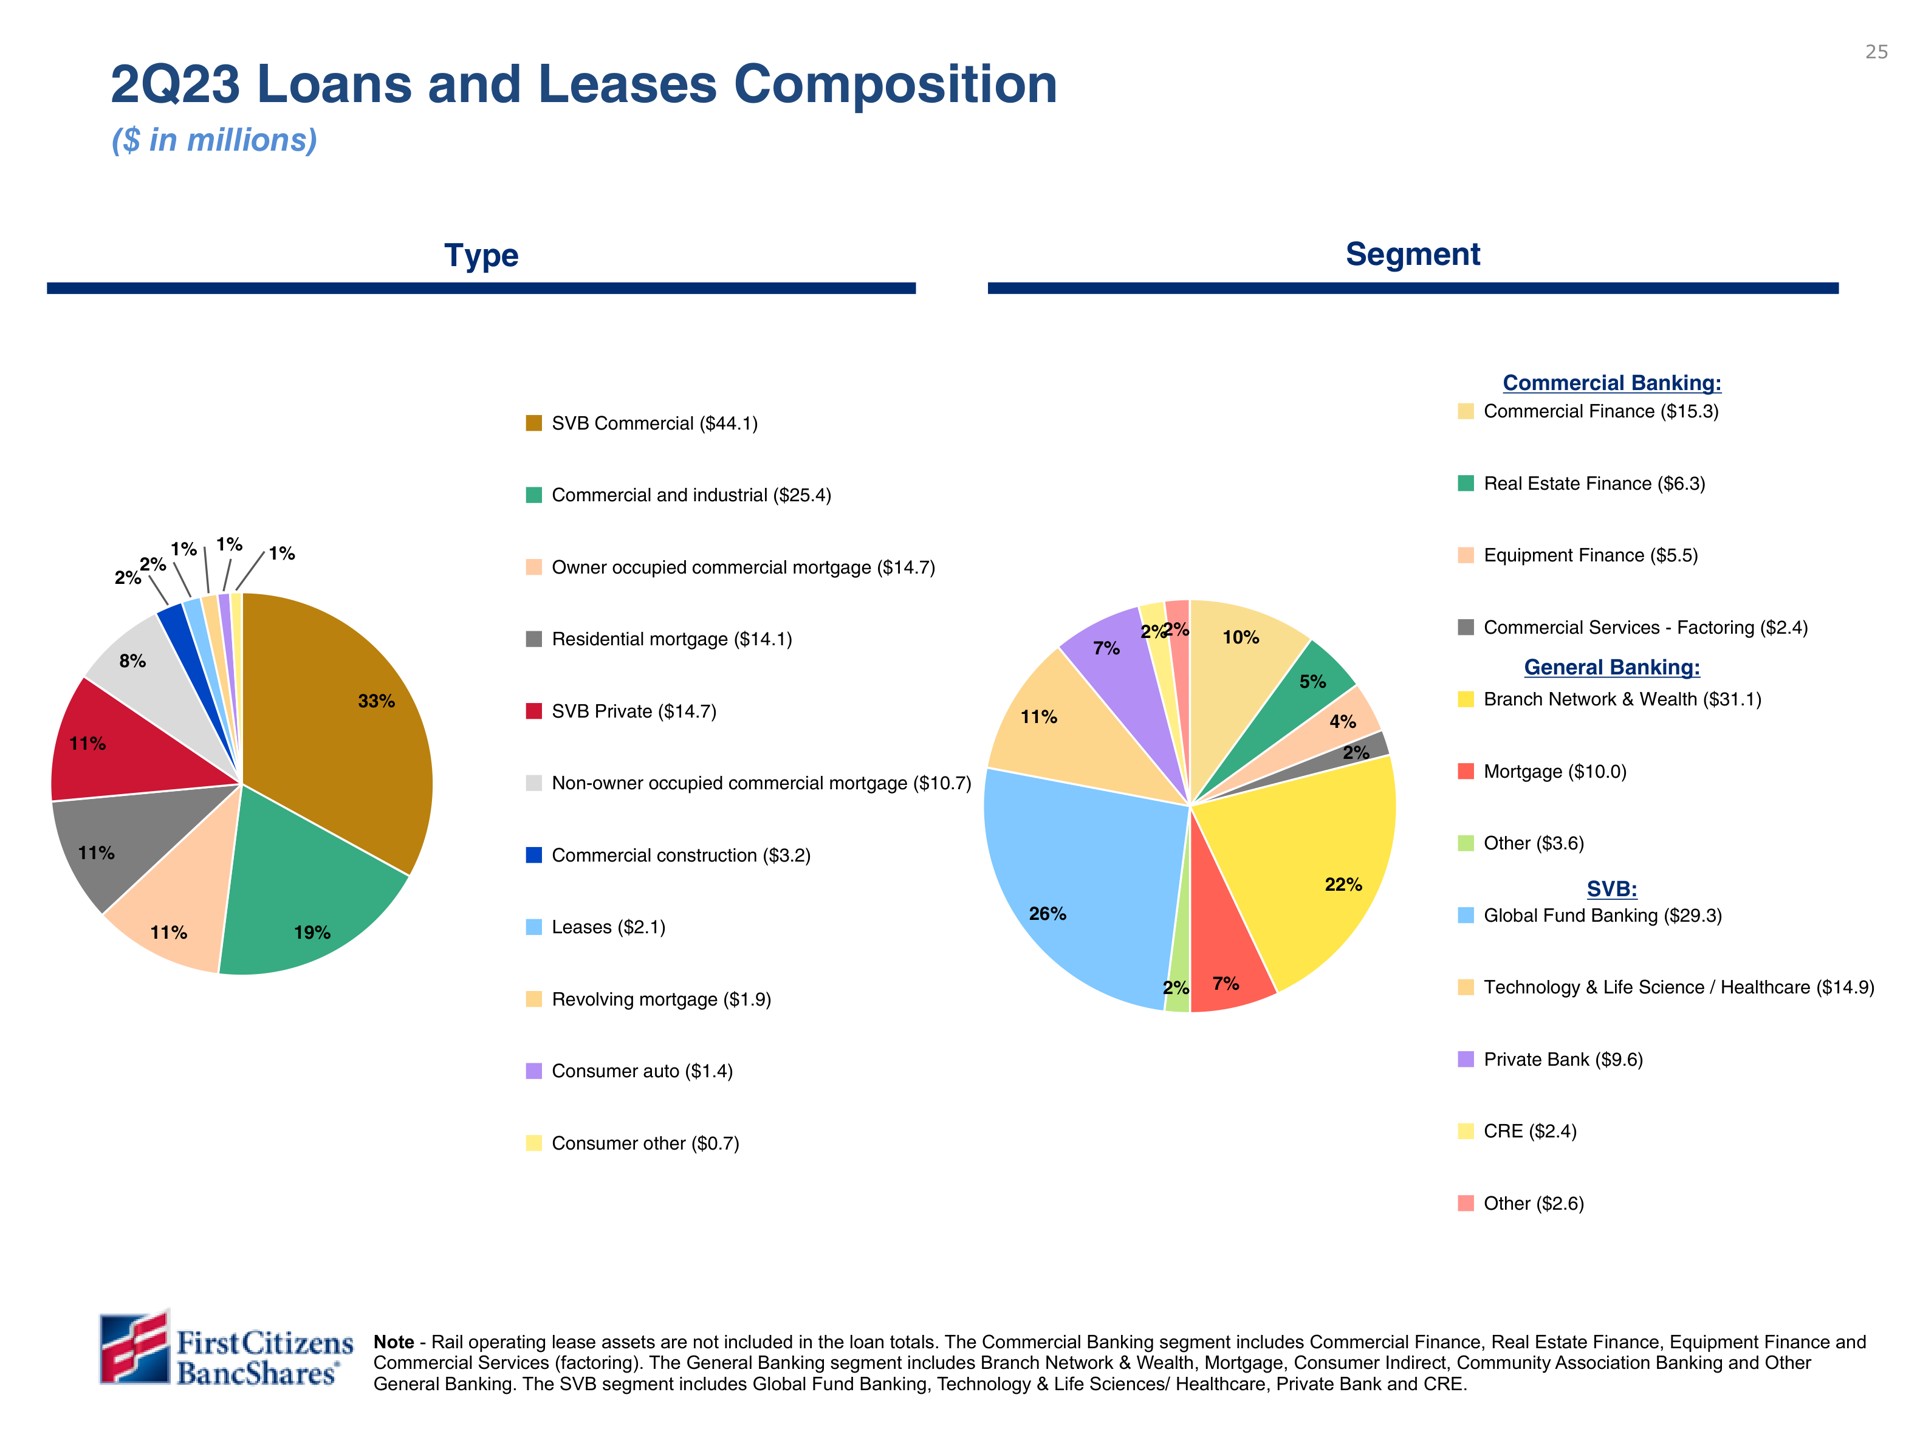 loans and leases composition | First Citizens BancShares